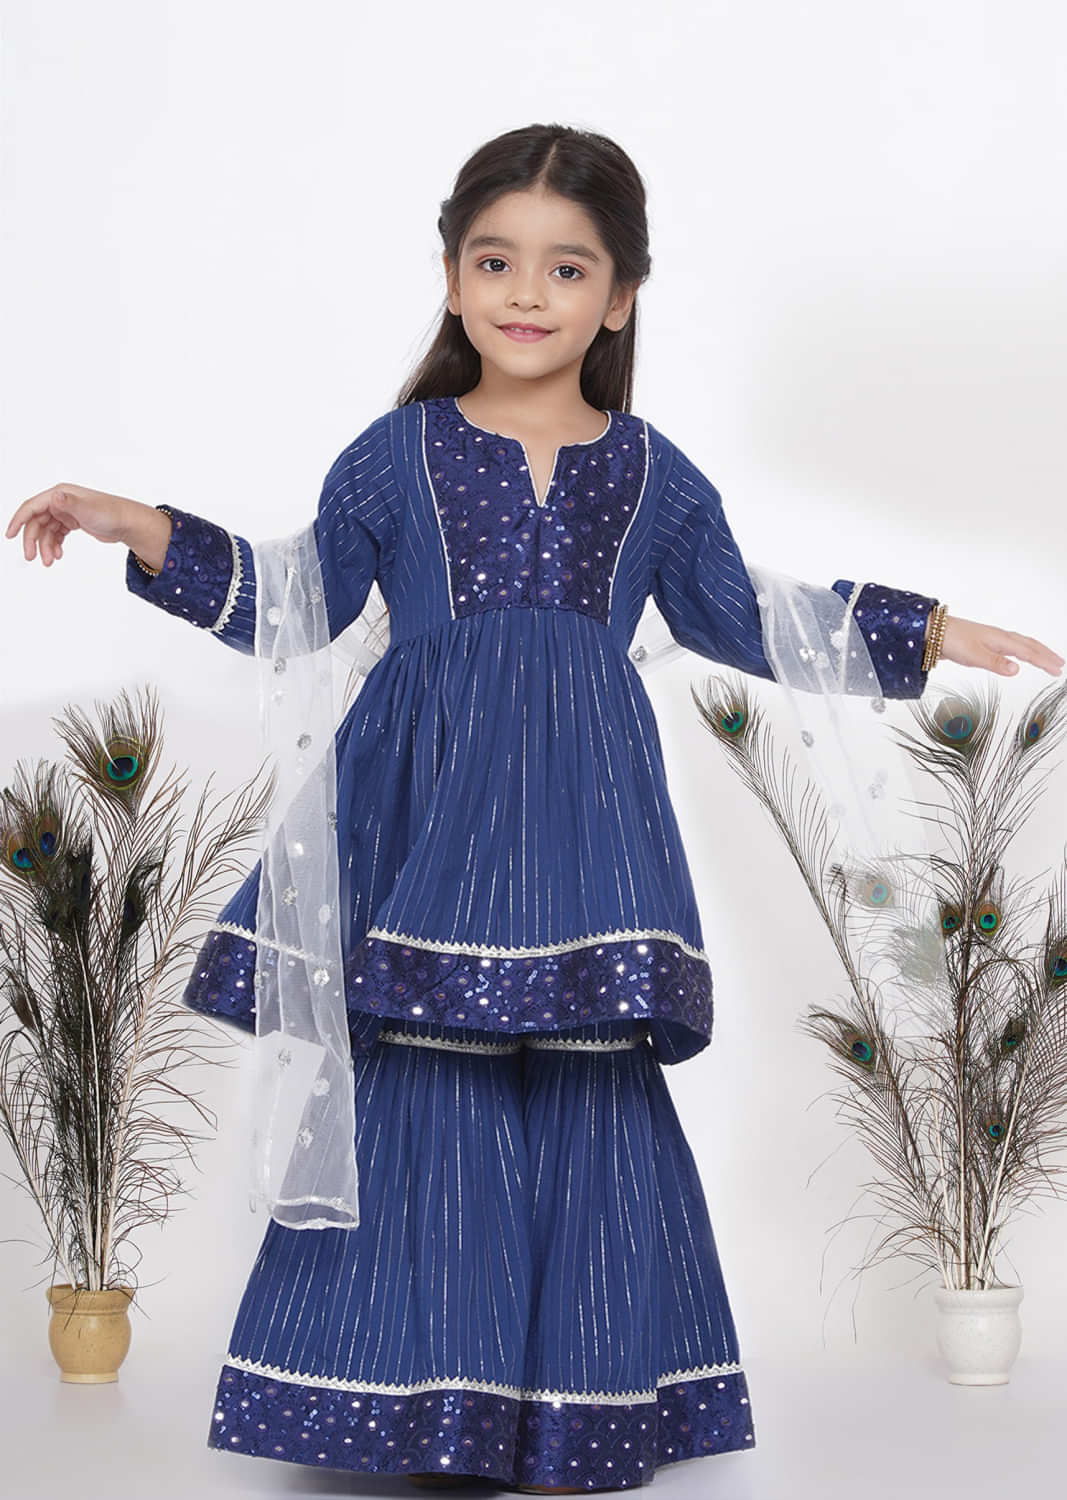 Kalki Blue Sharara Suit For Girls In Cotton With Embroidery In Mirror And White Dupatta